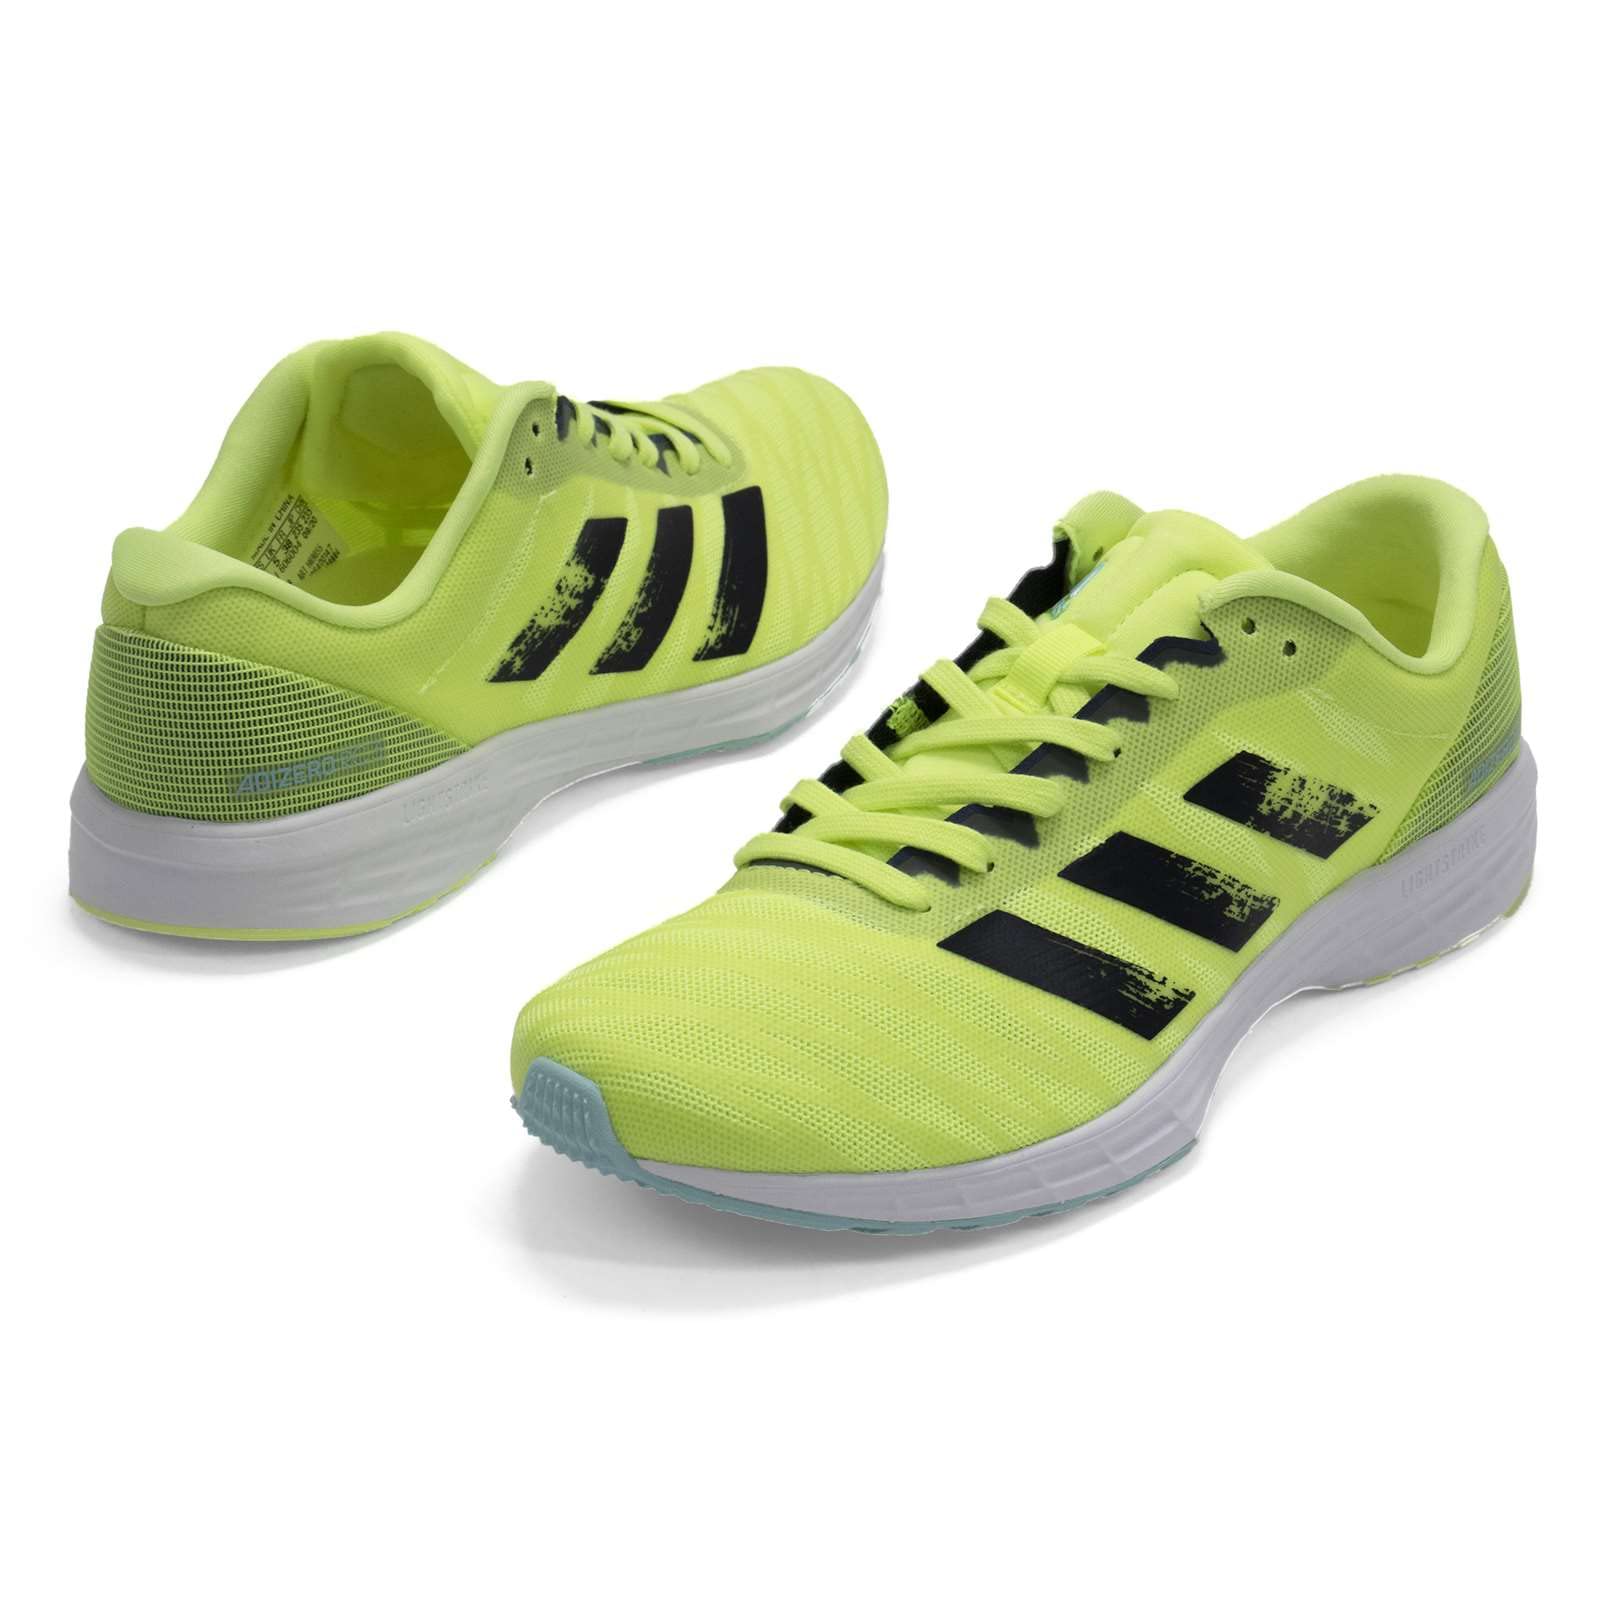 adidas Womens Adizero Rc 3 Running Sneakers Shoes - Yellow - Size 11 M